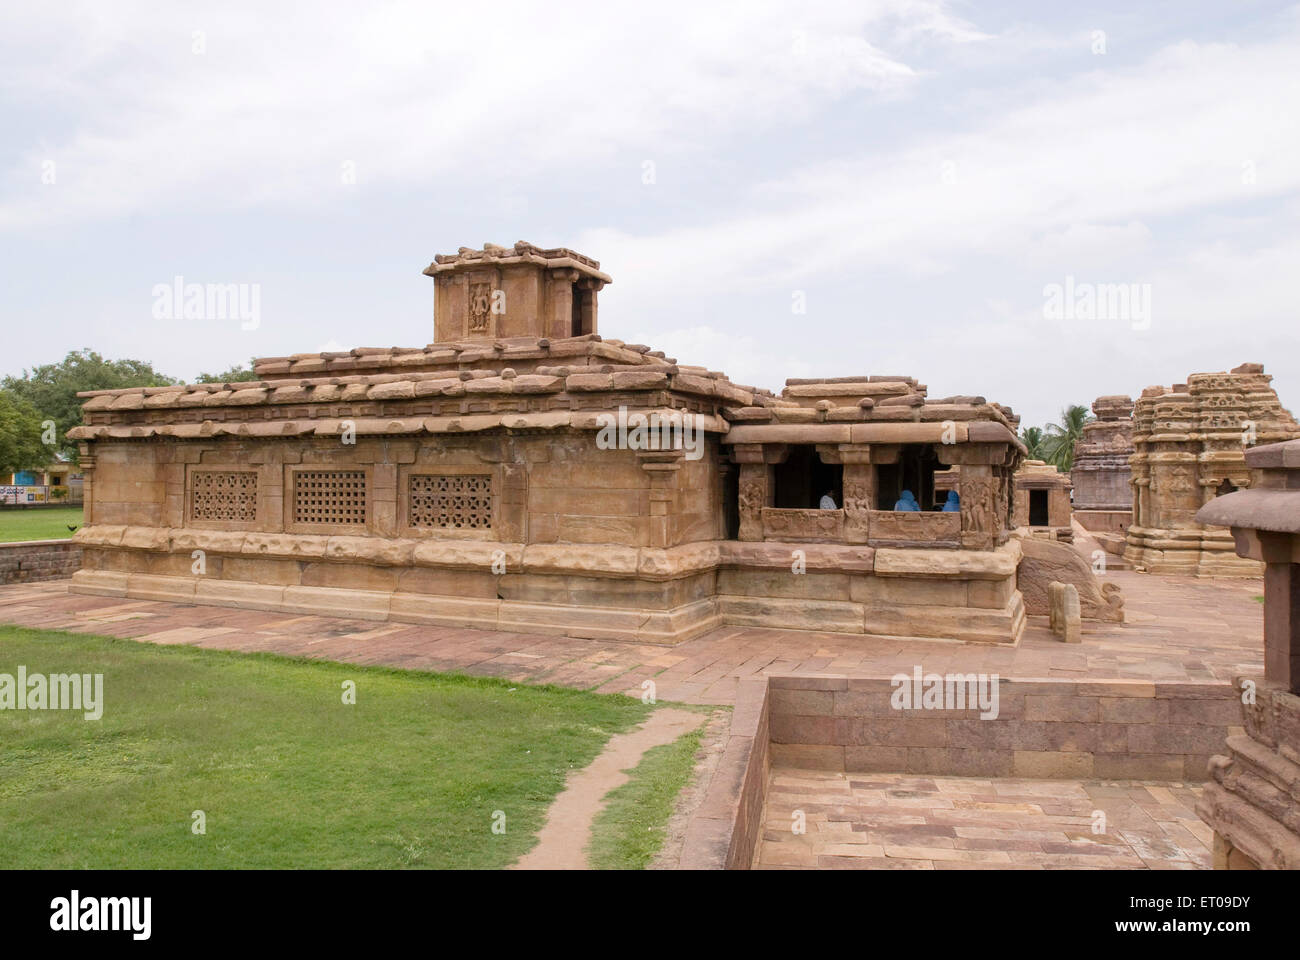 A view of the Ladkhan temple built in 7th century ; Aihole ; Karnataka ; India Stock Photo